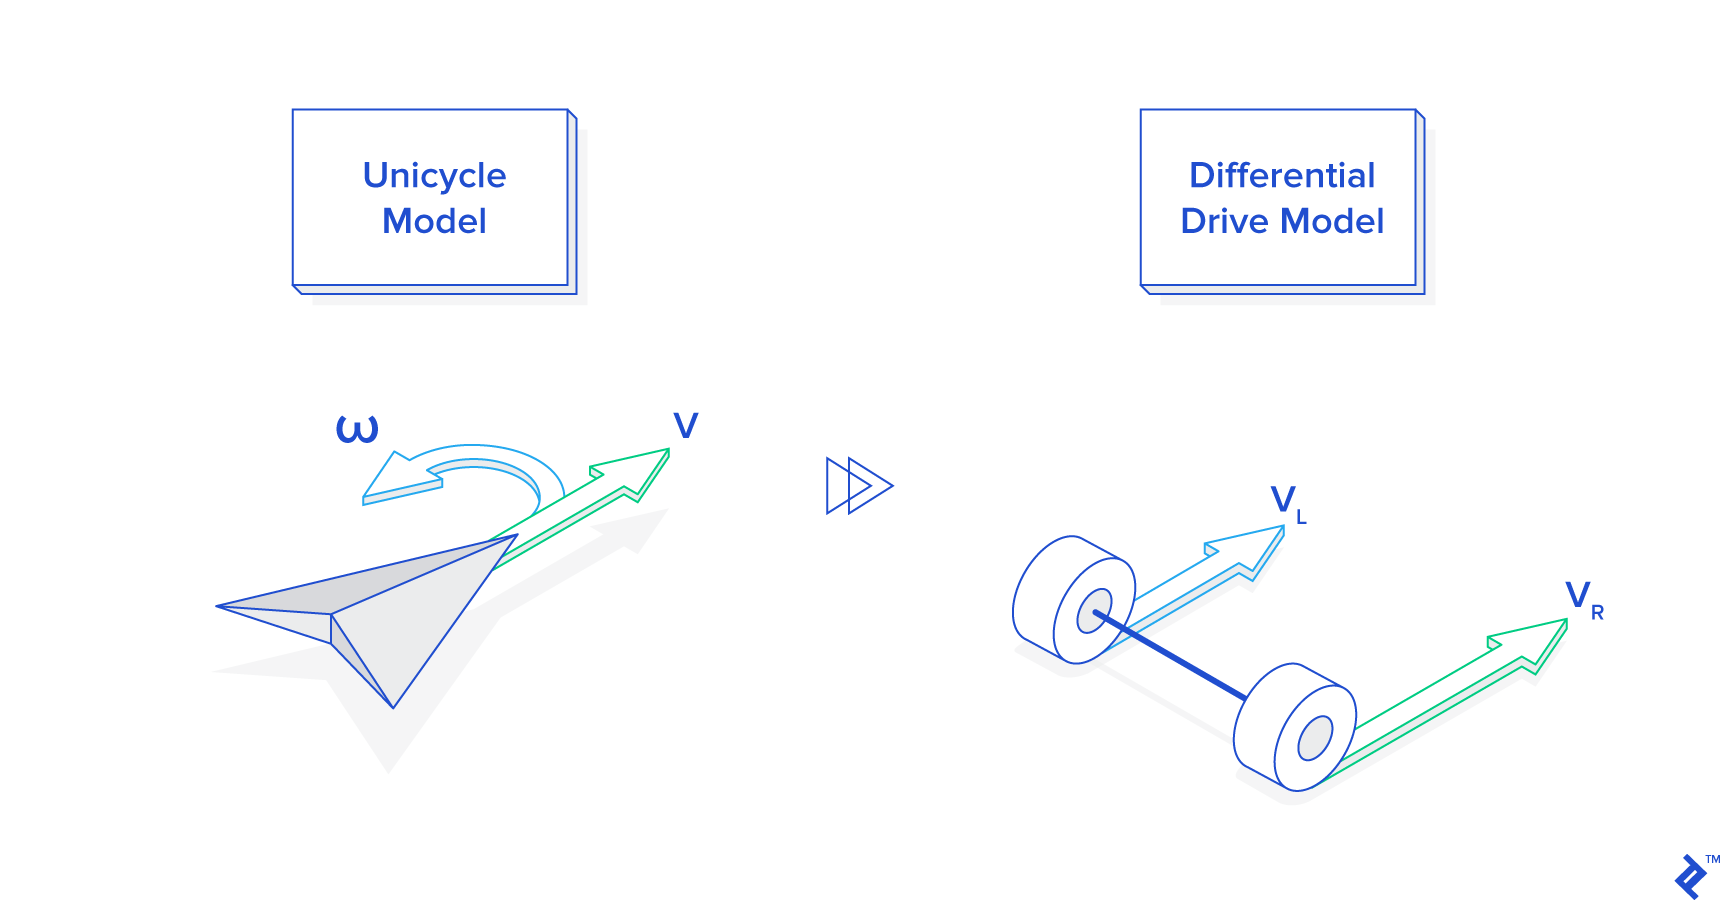 In robotics programming, it's important to understand the difference between unicycle and differential drive models.